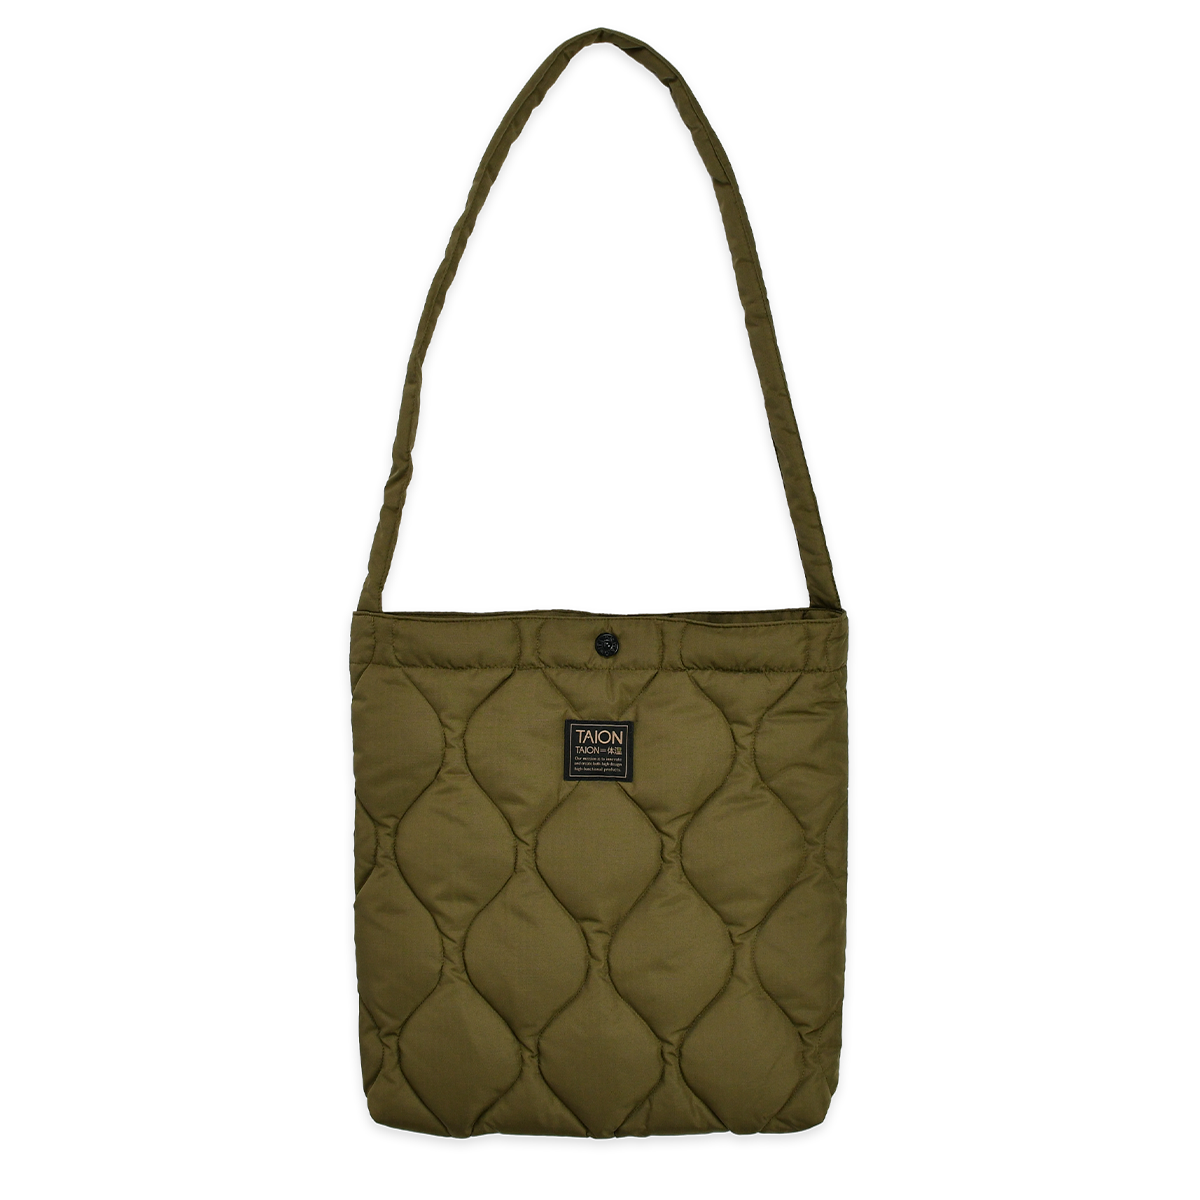 TAION - MILITARY CROSS BODY TOTE - MEDIUM - D OLIVE